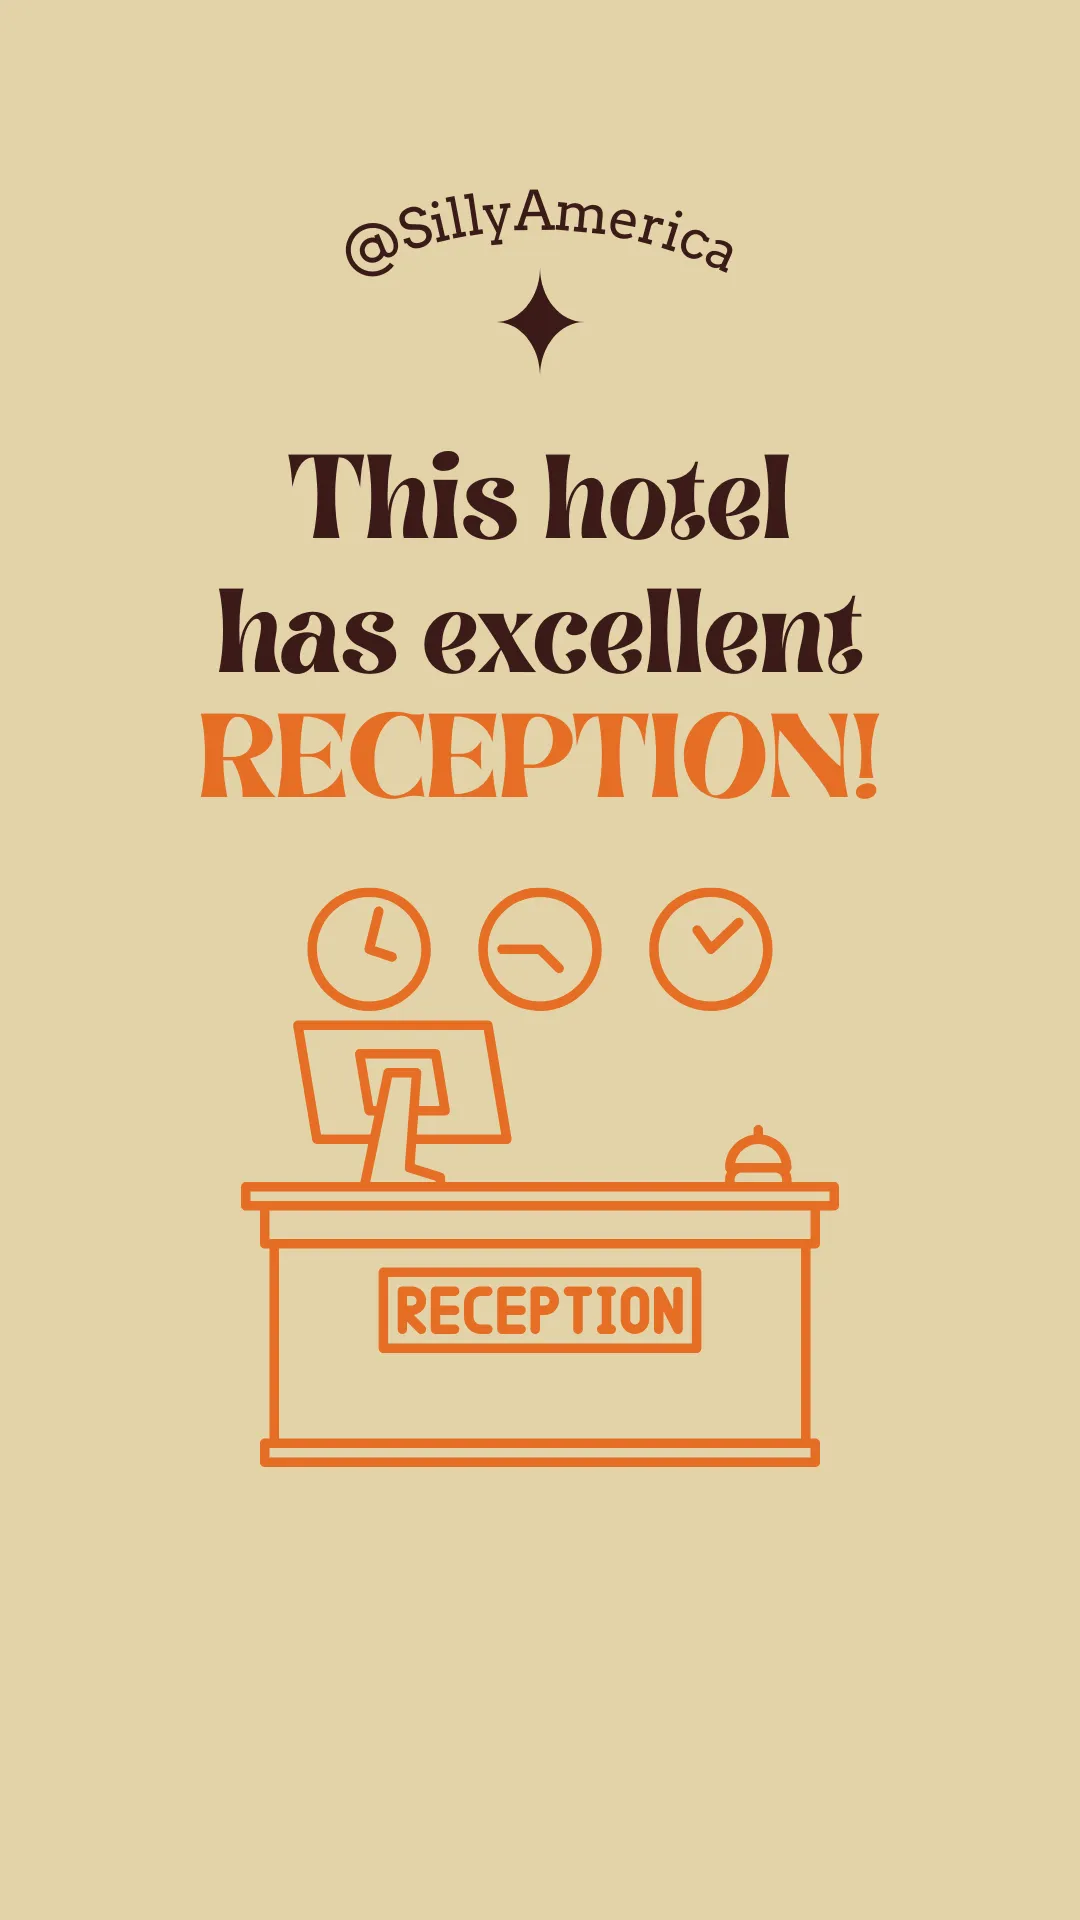 16 Funny Hotel Puns for Social Media - This hotel has excellent RECEPTION!